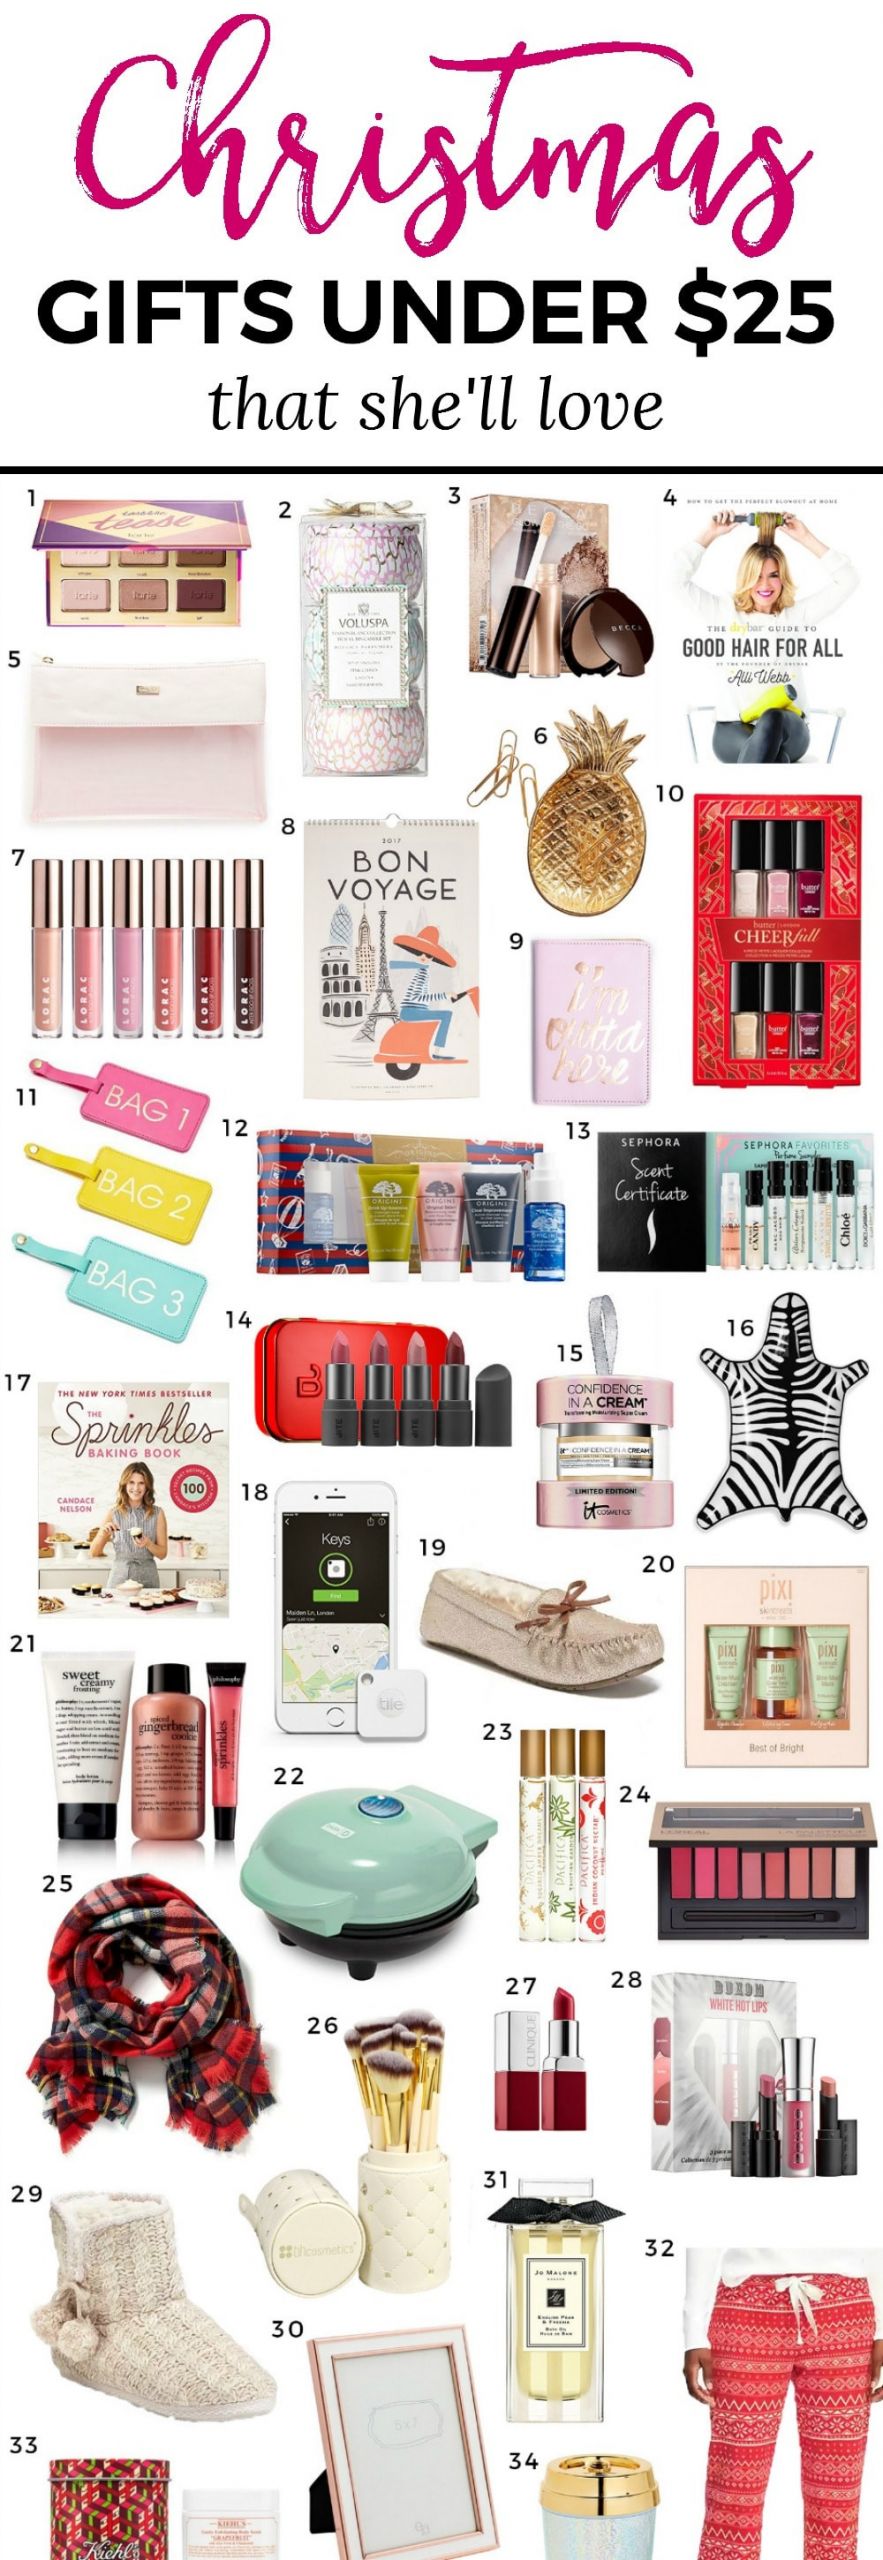 Holiday Gift Ideas For Woman
 The Best Christmas Gift Ideas for Women under $25